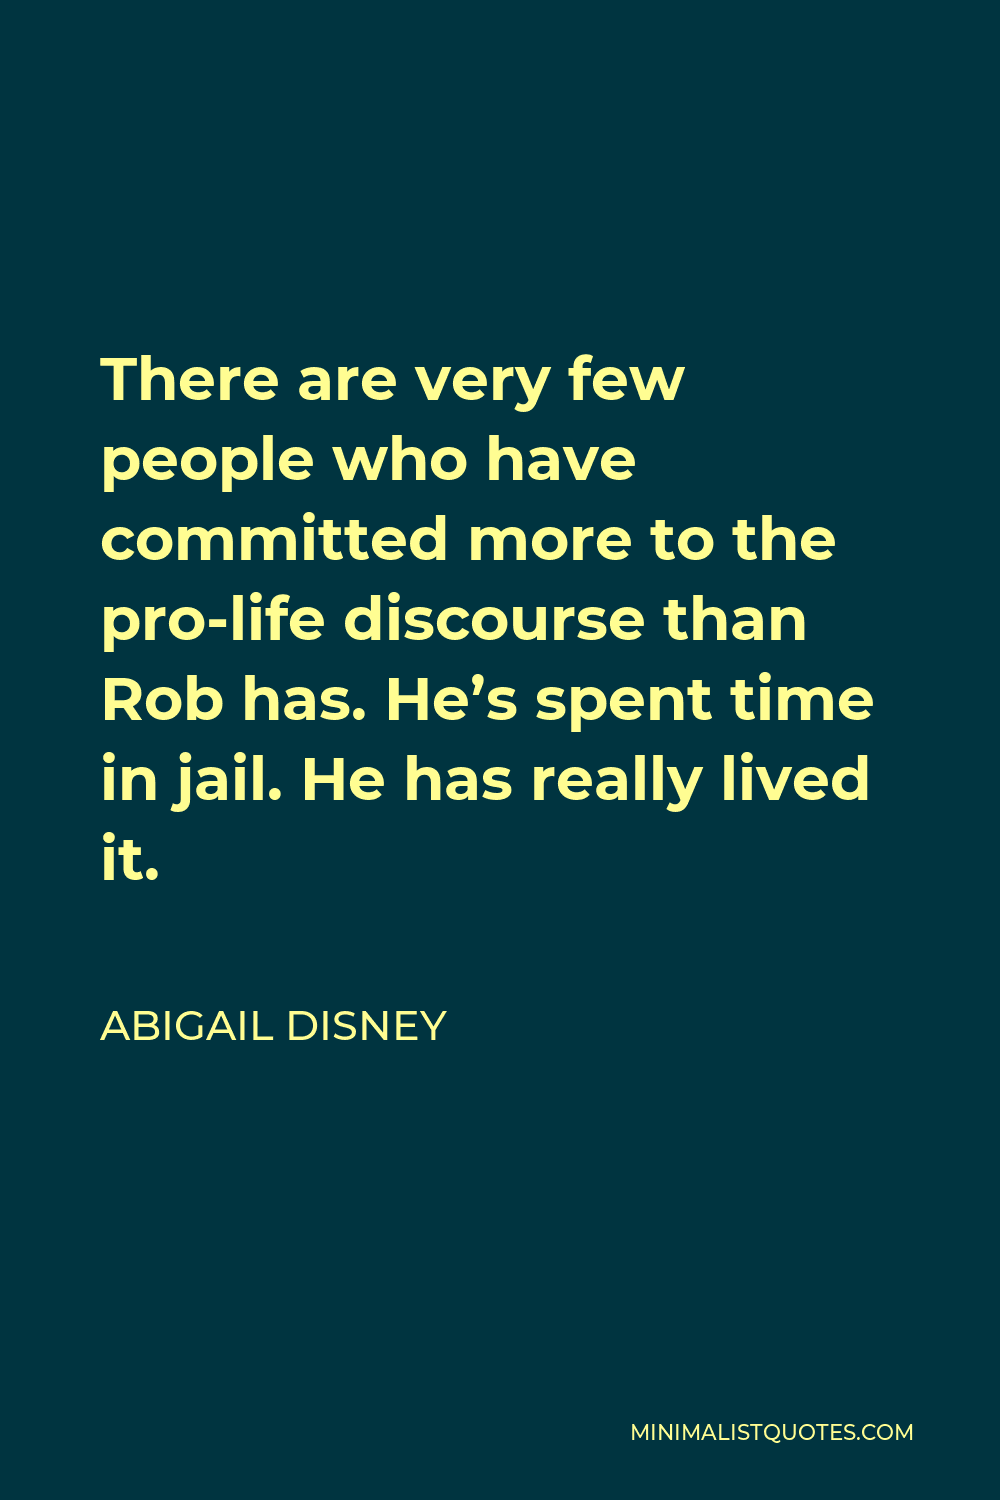 Abigail Disney Quote - There are very few people who have committed more to the pro-life discourse than Rob has. He’s spent time in jail. He has really lived it.